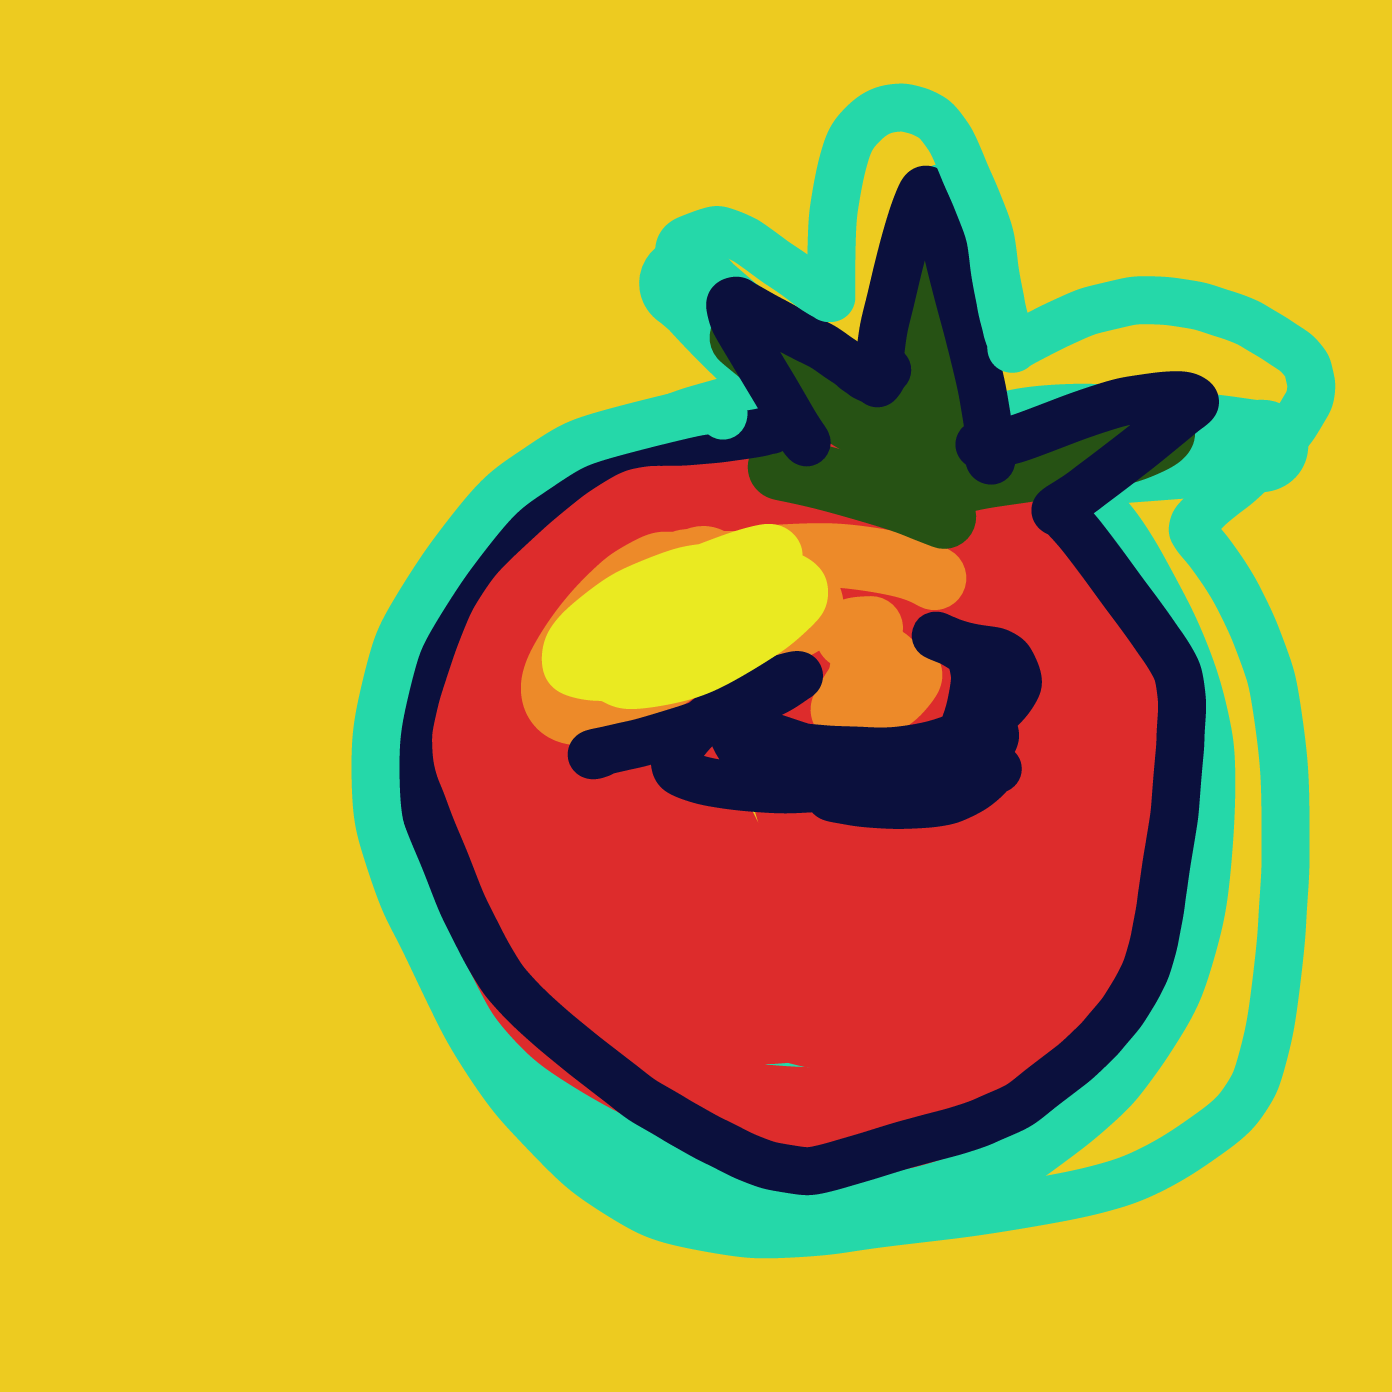 Drawing in Tomato by Chumky